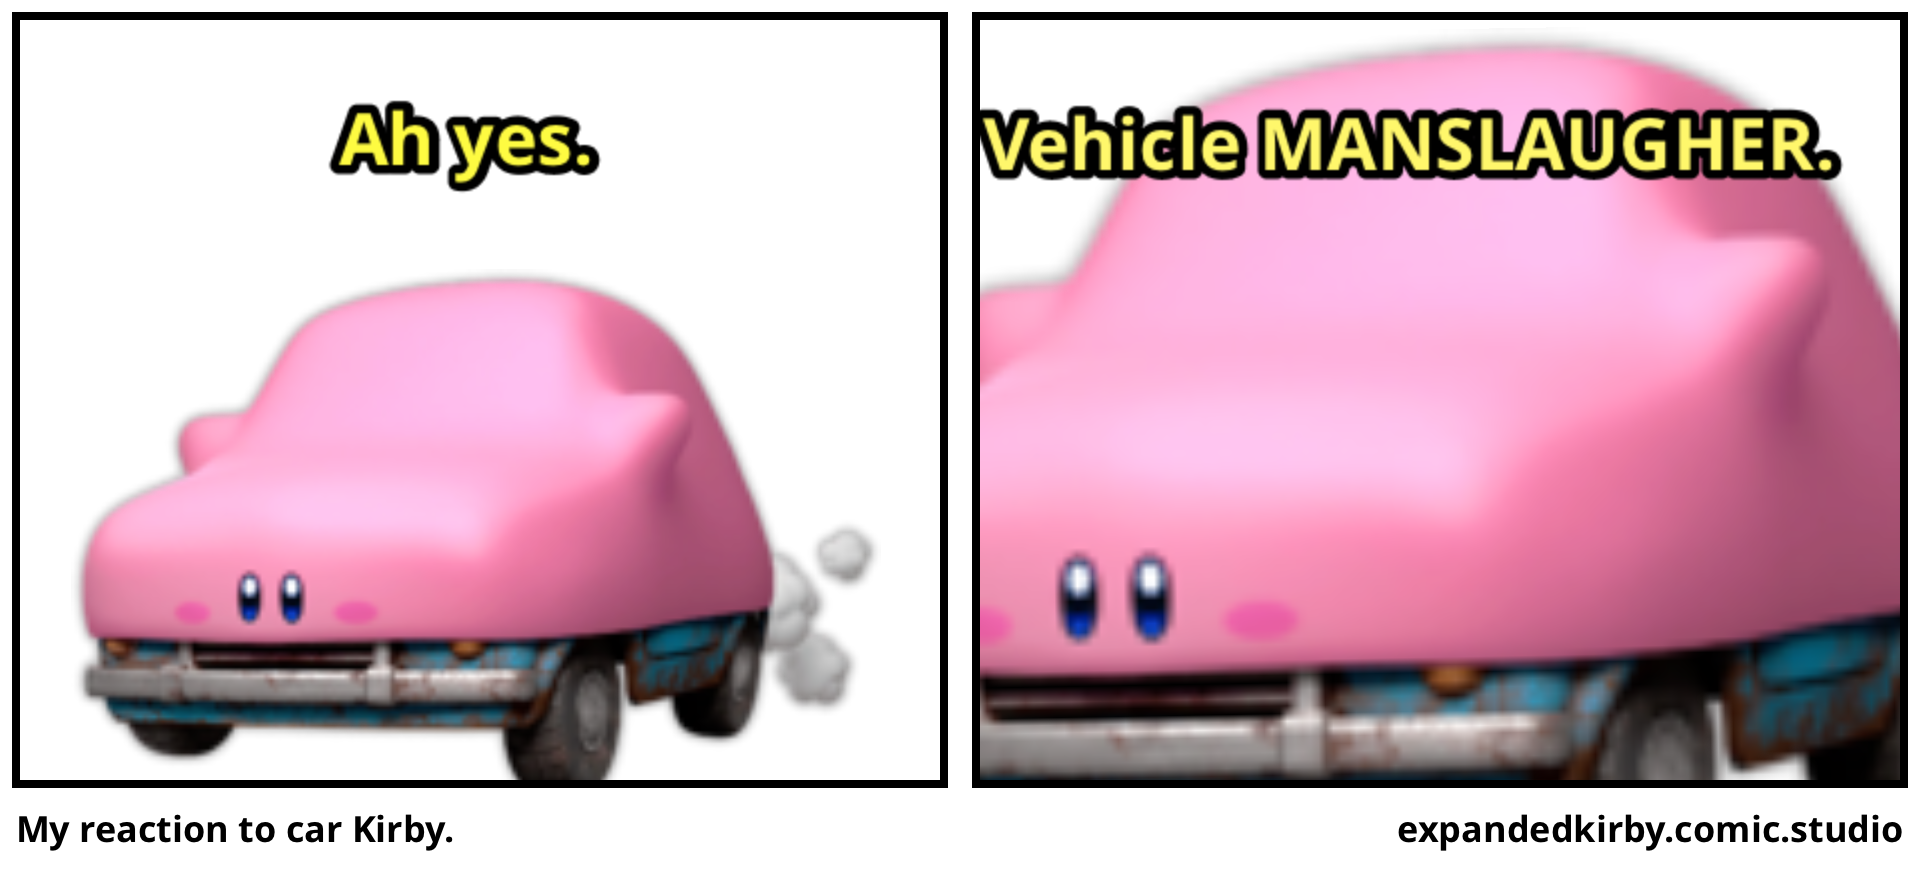 My reaction to car Kirby.